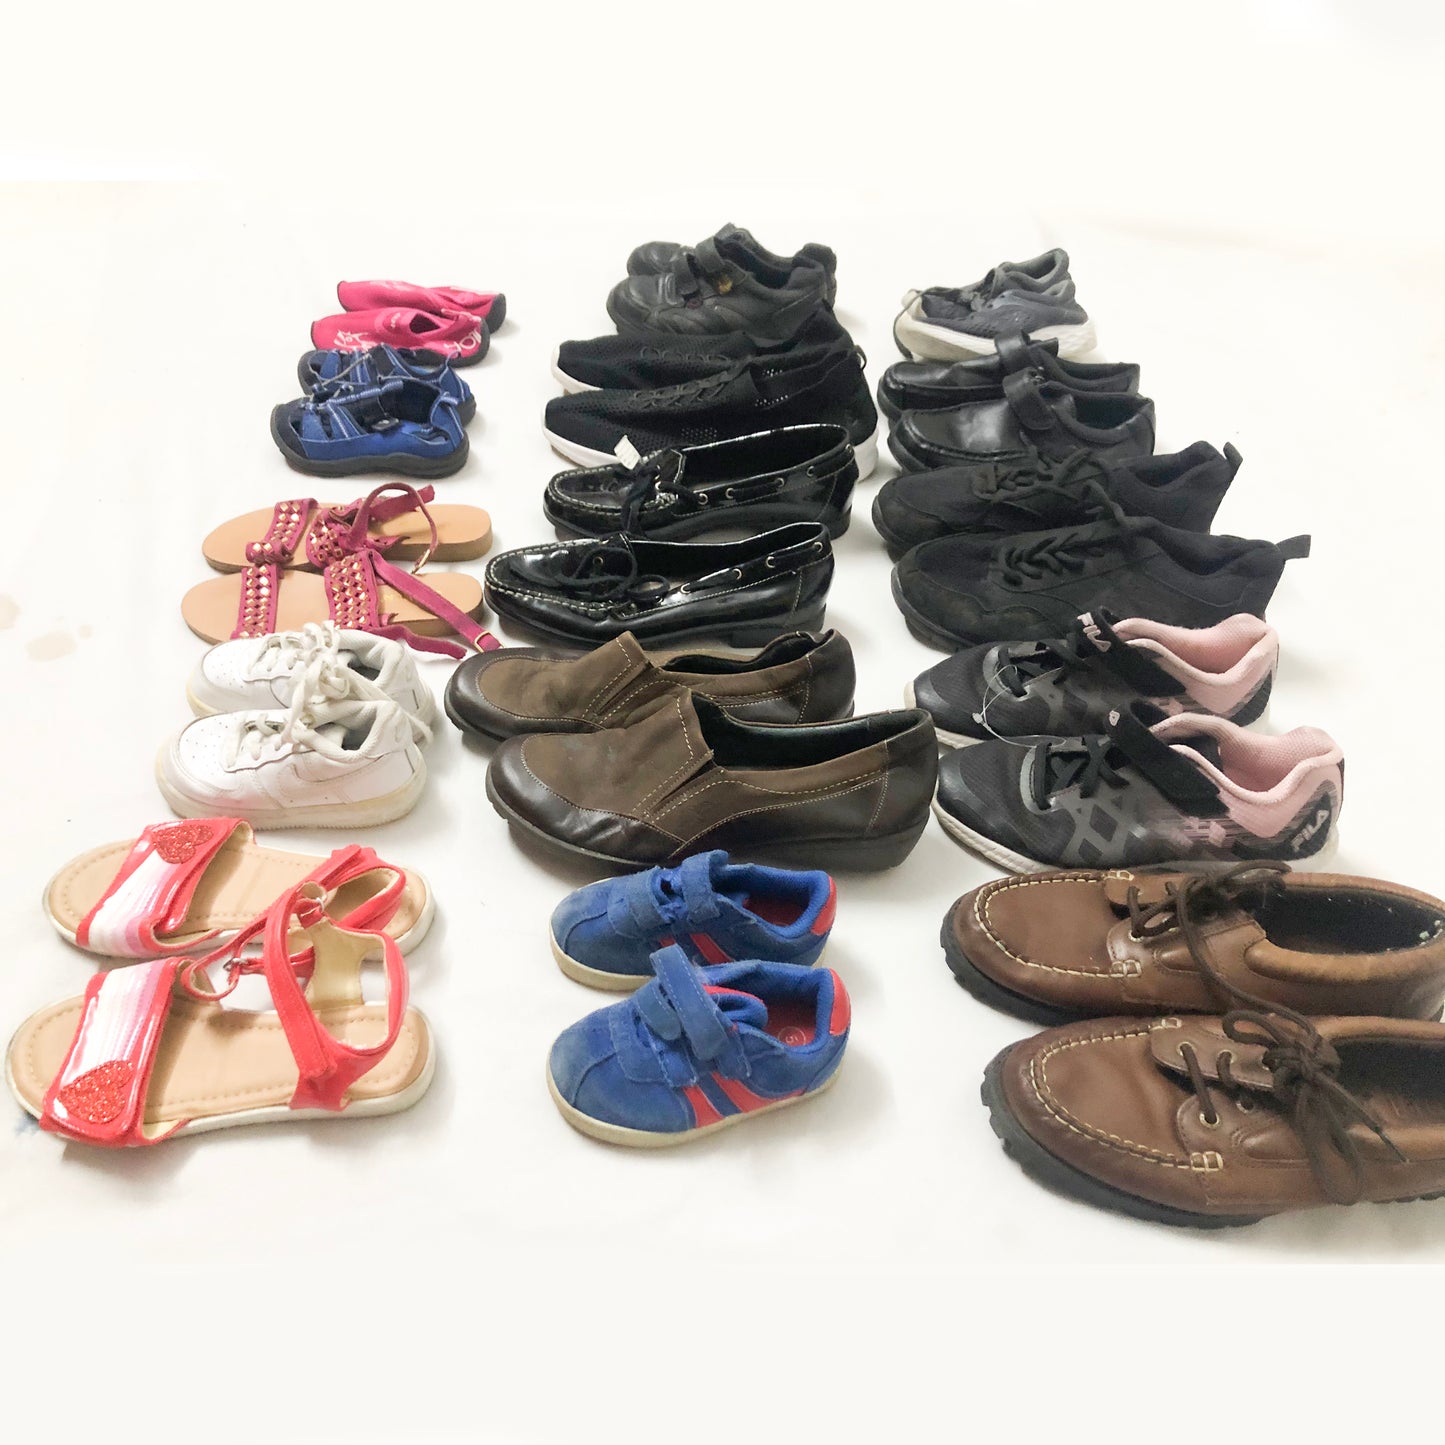 Grade 1 and 2 Kids Shoes Bundle of 50 Pairs